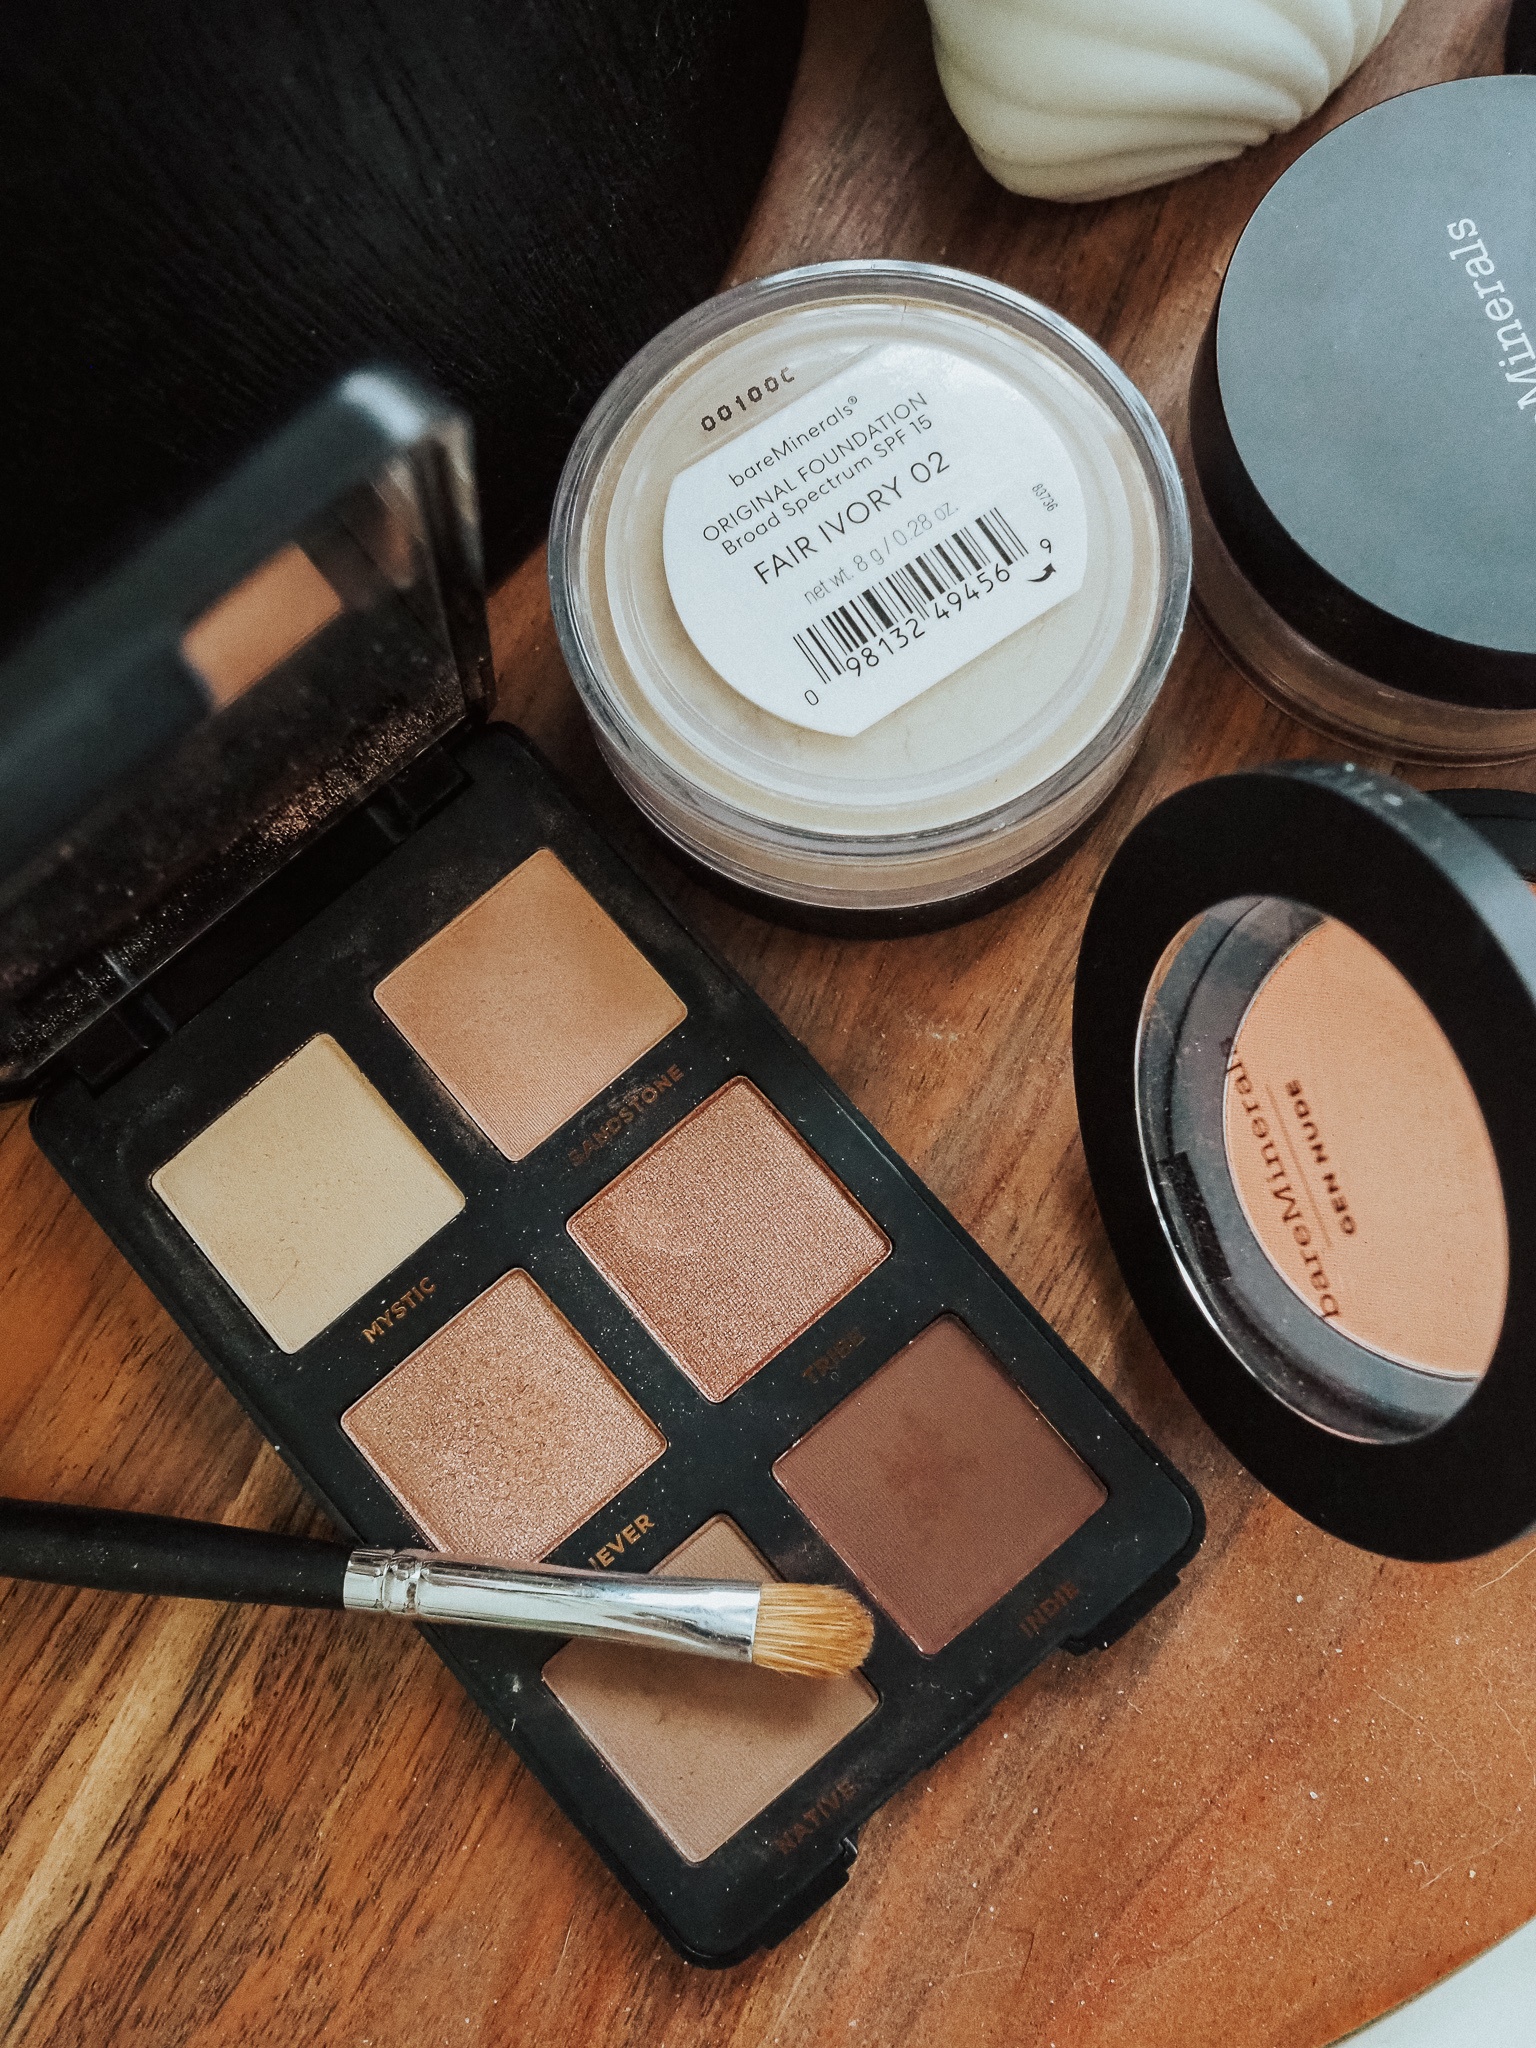 Kelsey from Blondes and Bagels reviews the best mineral makeup products and explains why mineral makeup is better for your skin.